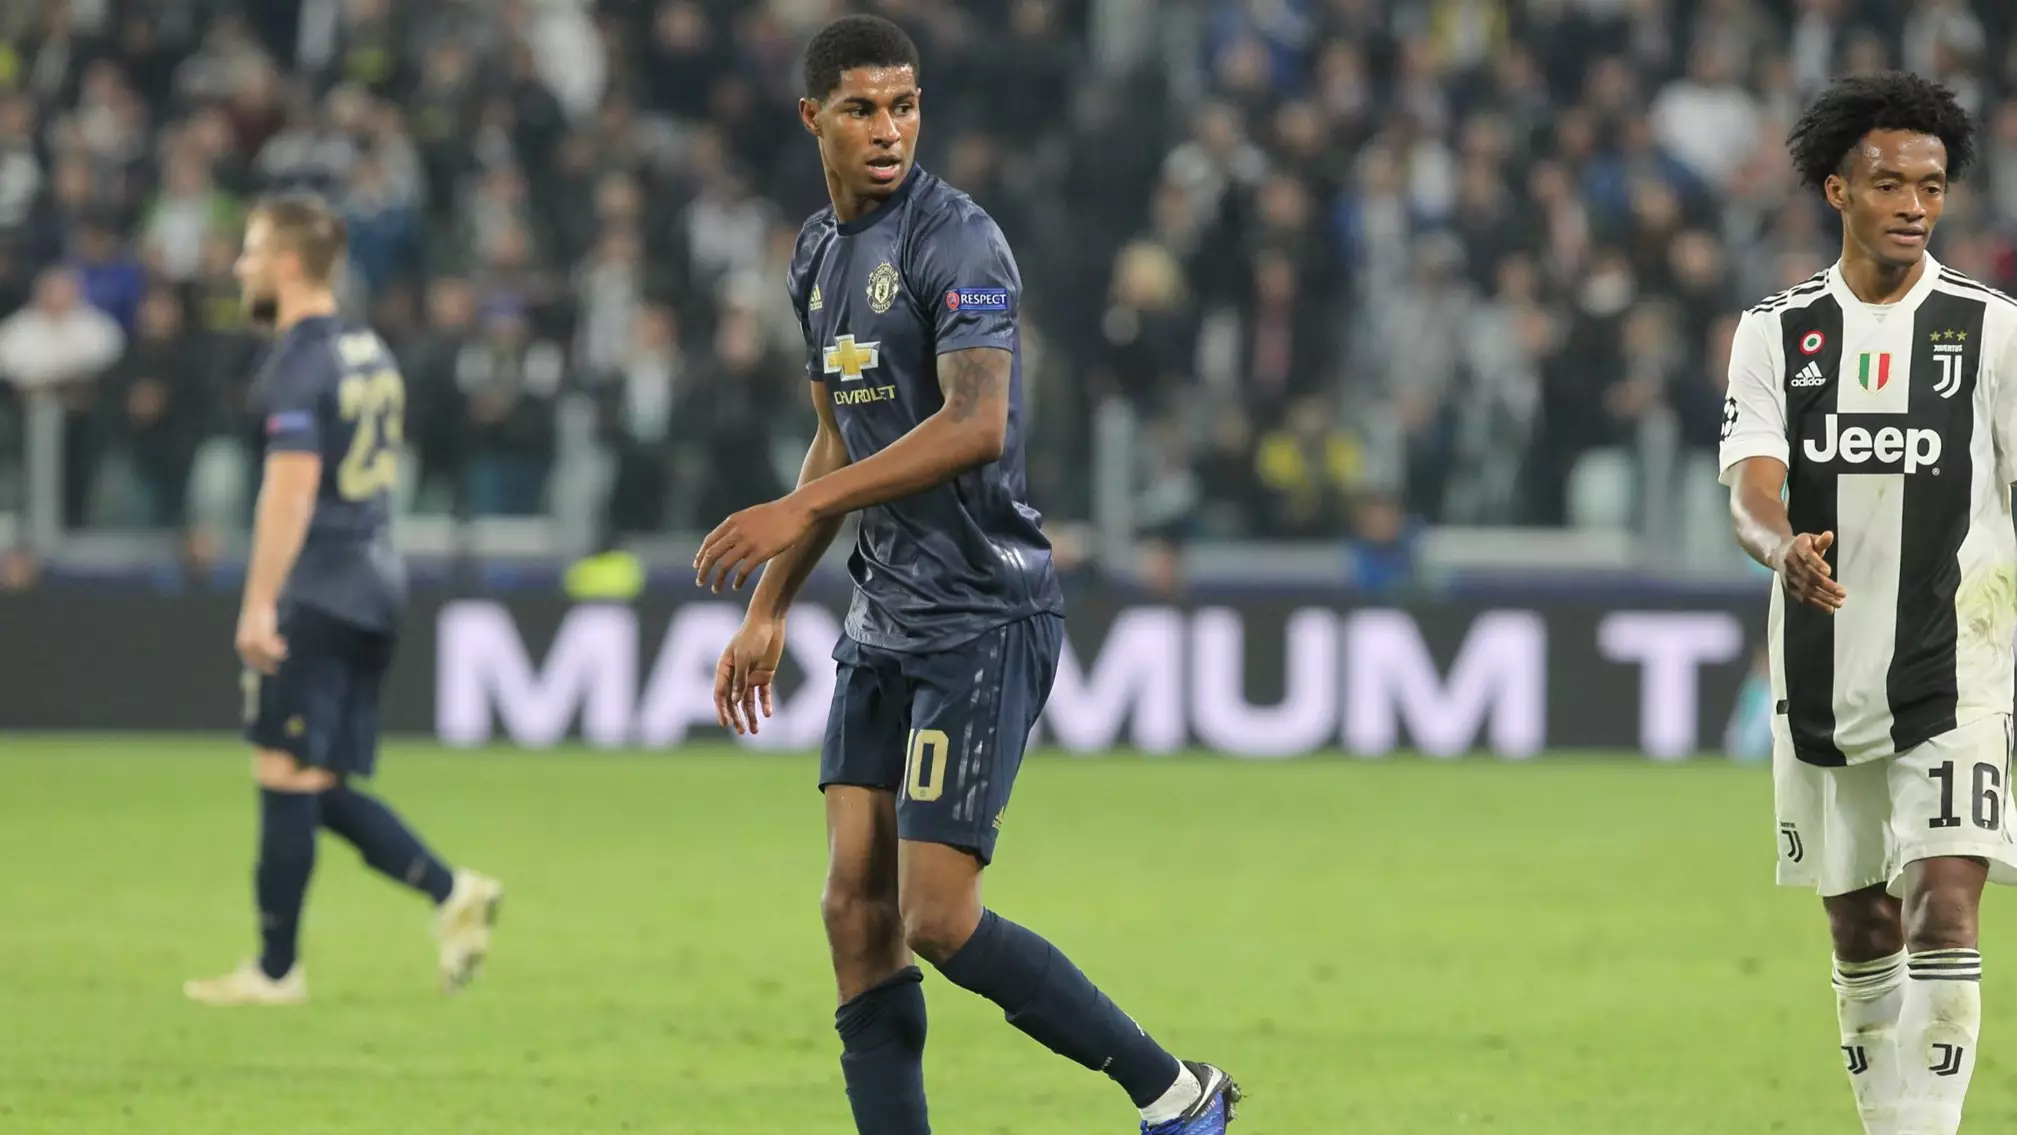 Juventus Seriously Interested In Manchester United's Marcus Rashford